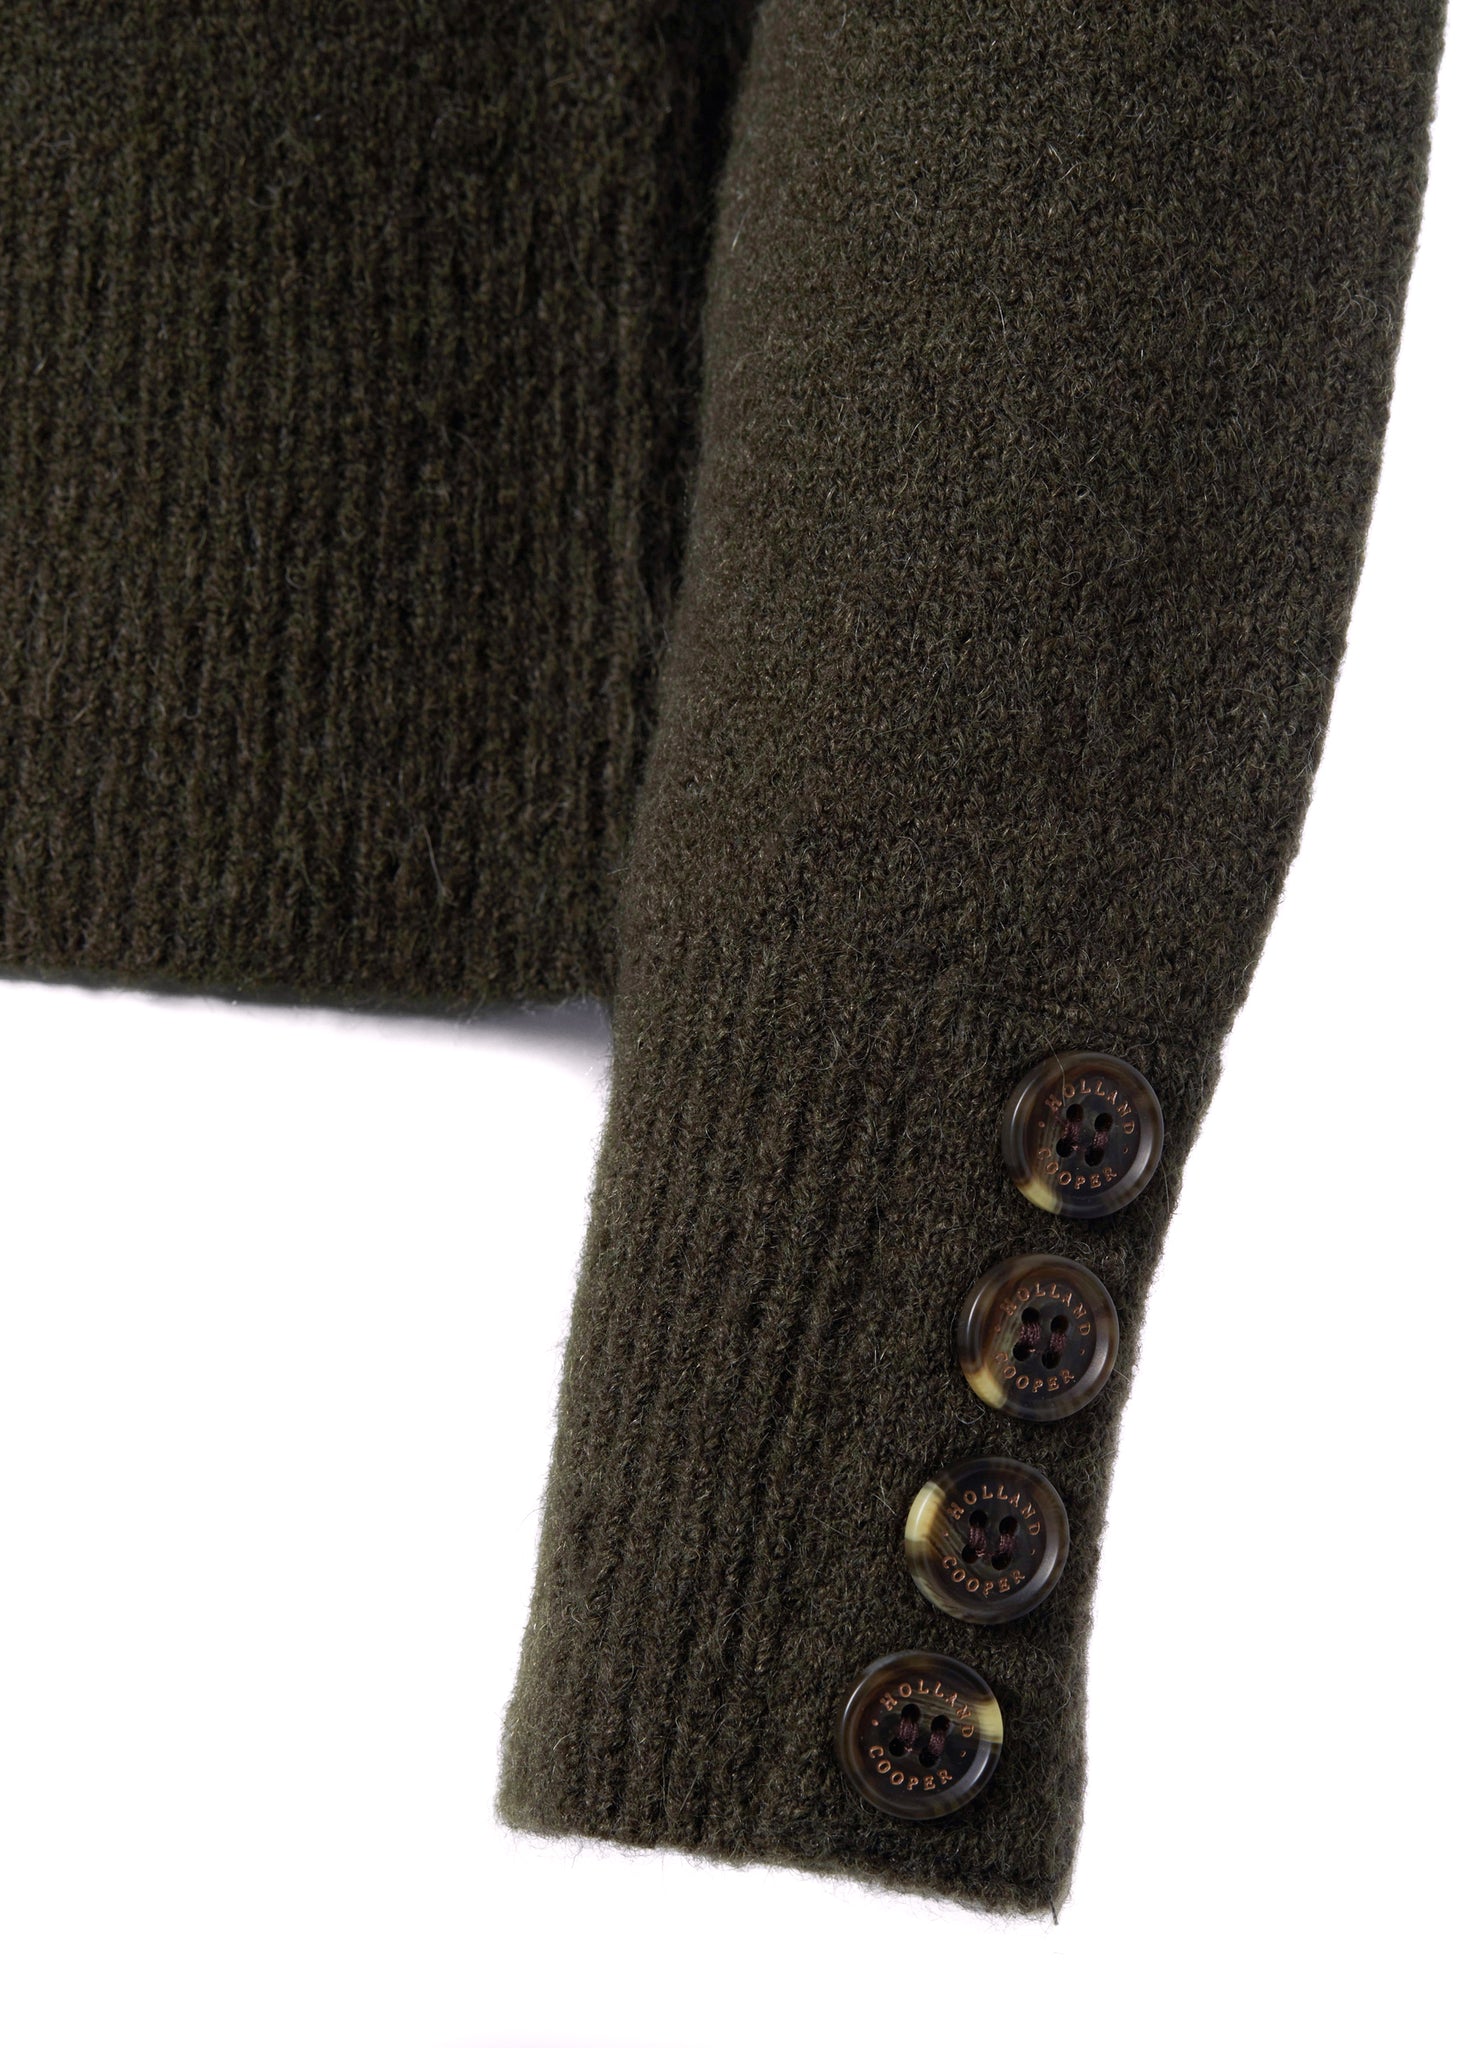 horn button detail cuffs on womens chunky knit crew neck jumper in fern green with half cable knit knit detailing and horn buttons across cuffs 